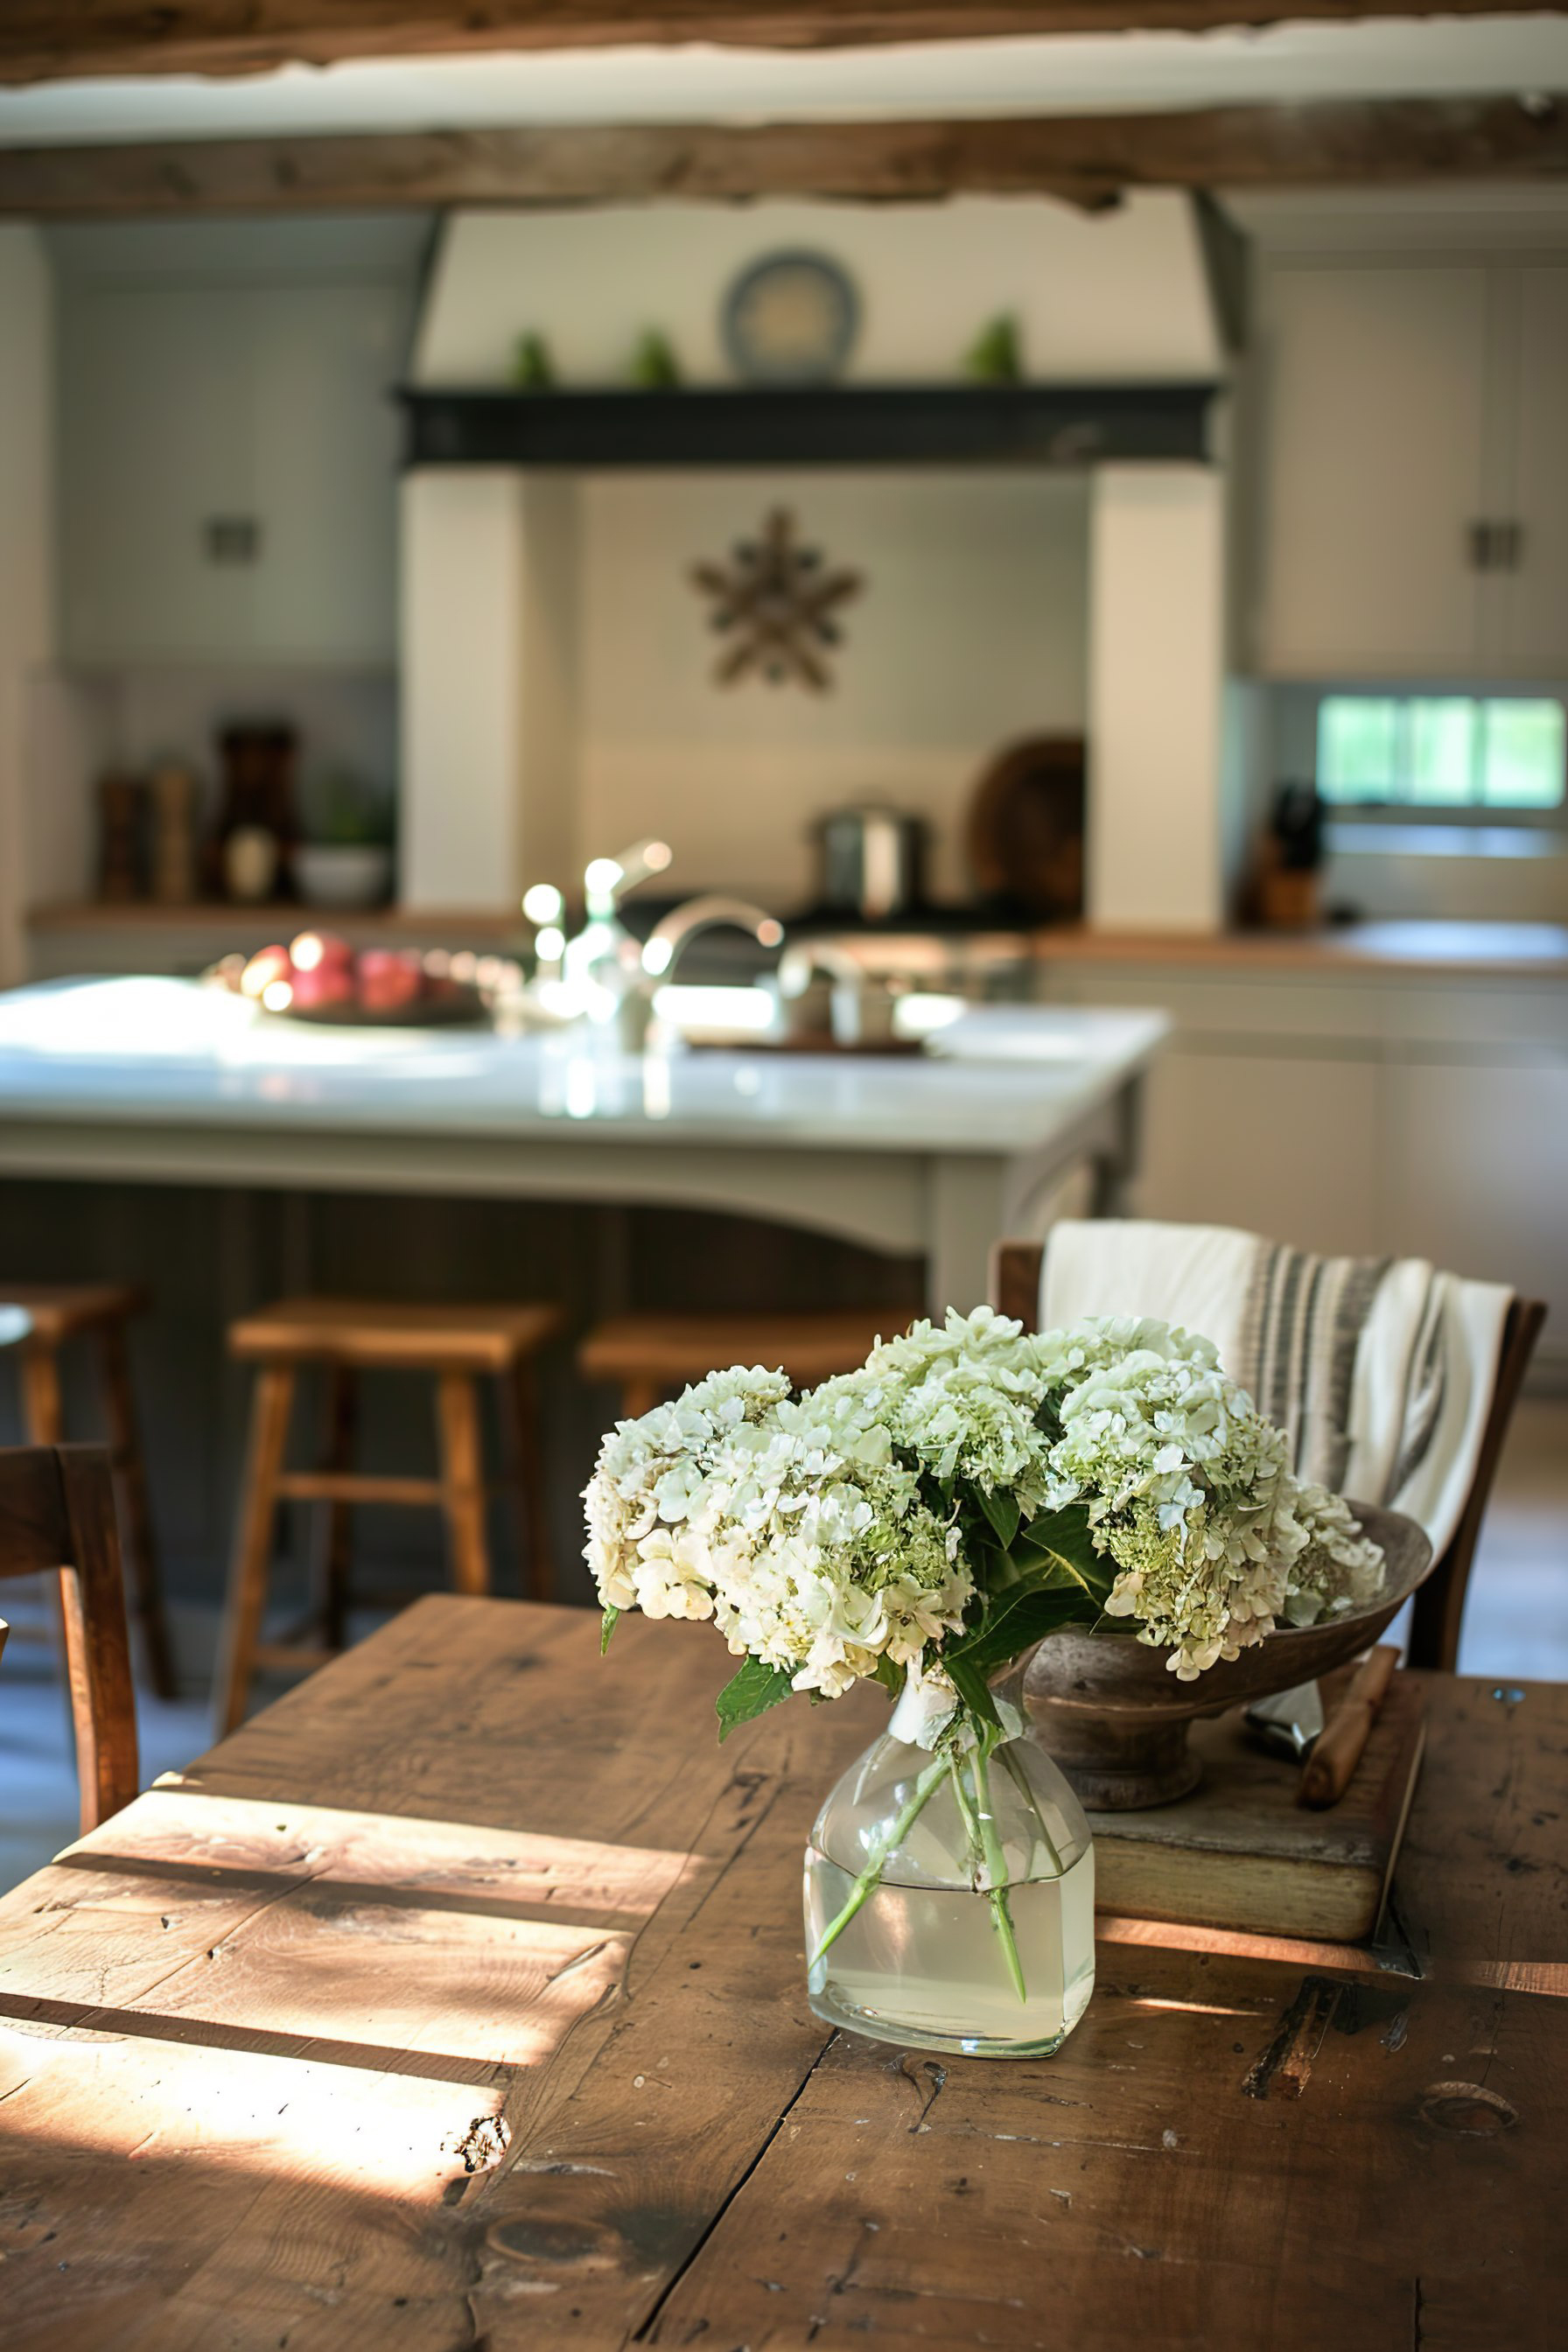 A cozy, sunlit kitchen with wooden beams, a bouquet of white hydrangeas on a rustic table, and a blurred background.